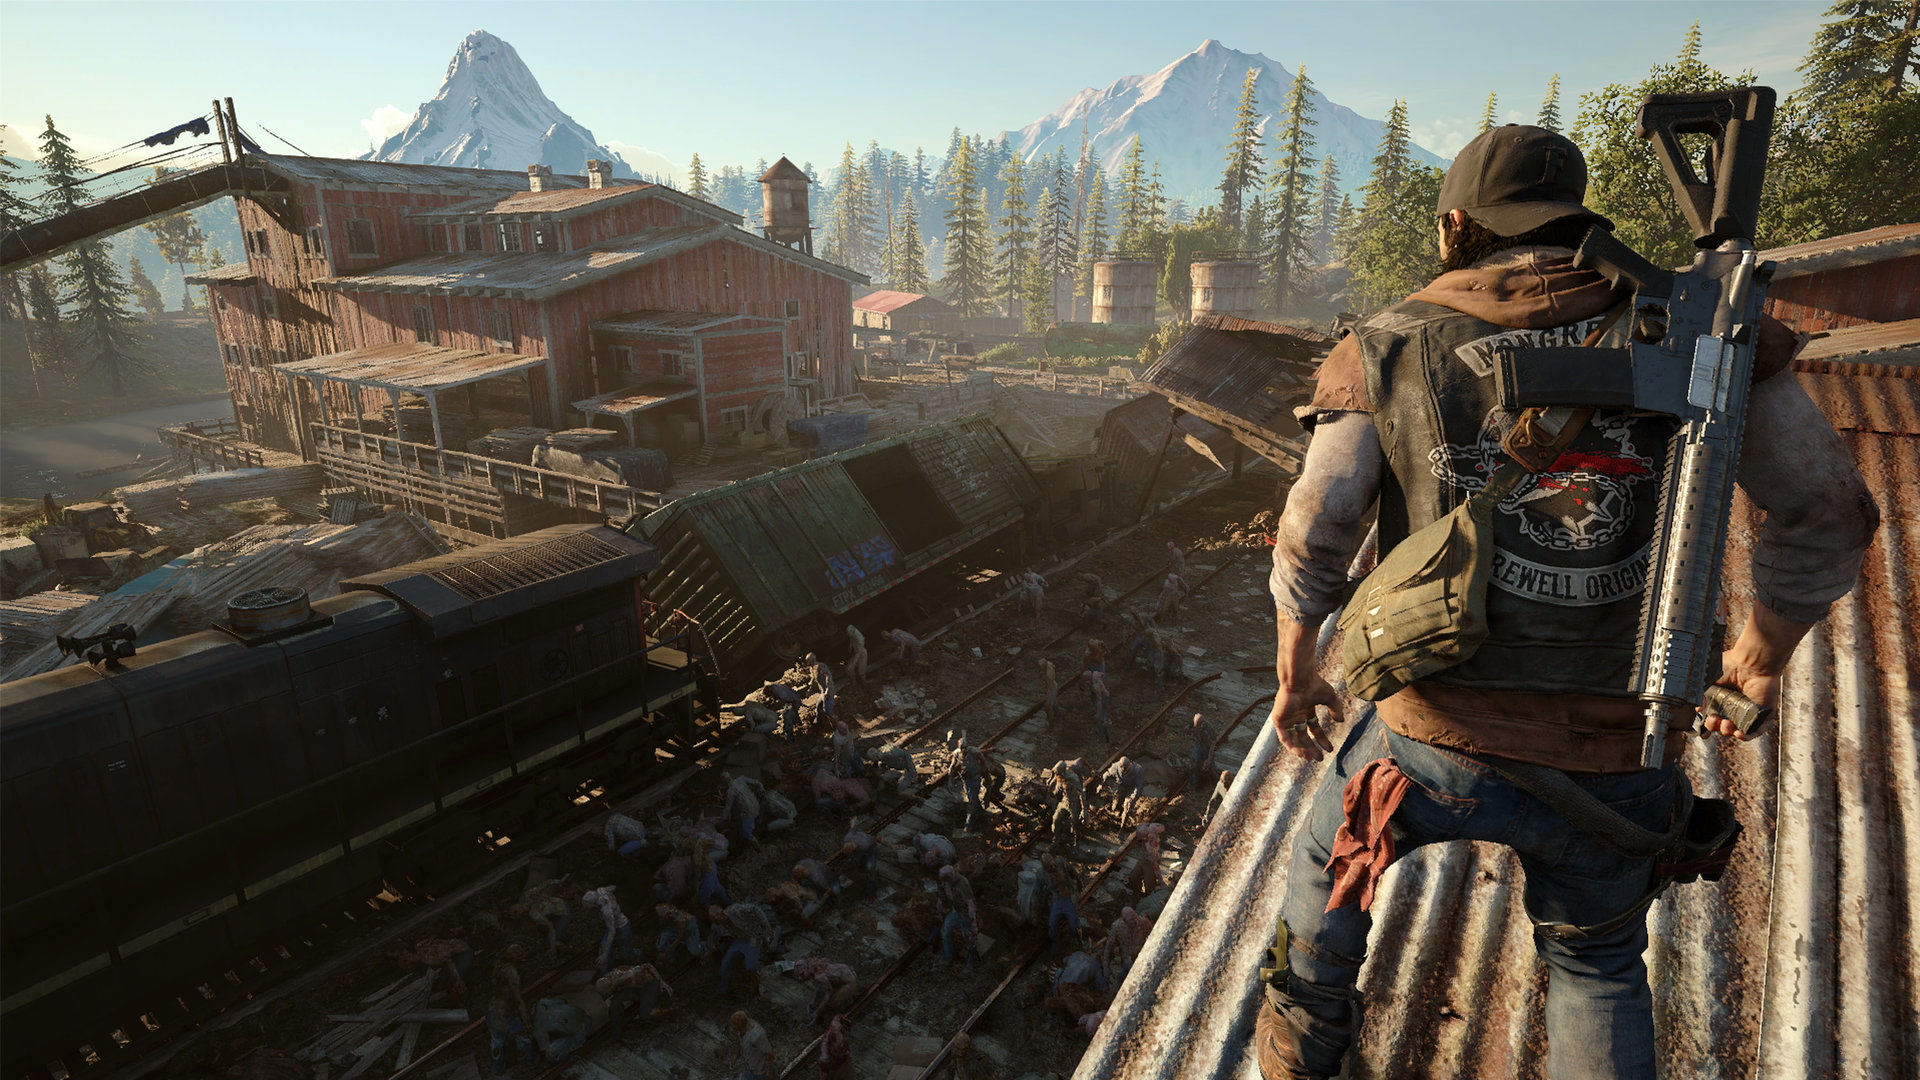 New Days Gone PC Hordes Mod Makes Them Even More Challenging